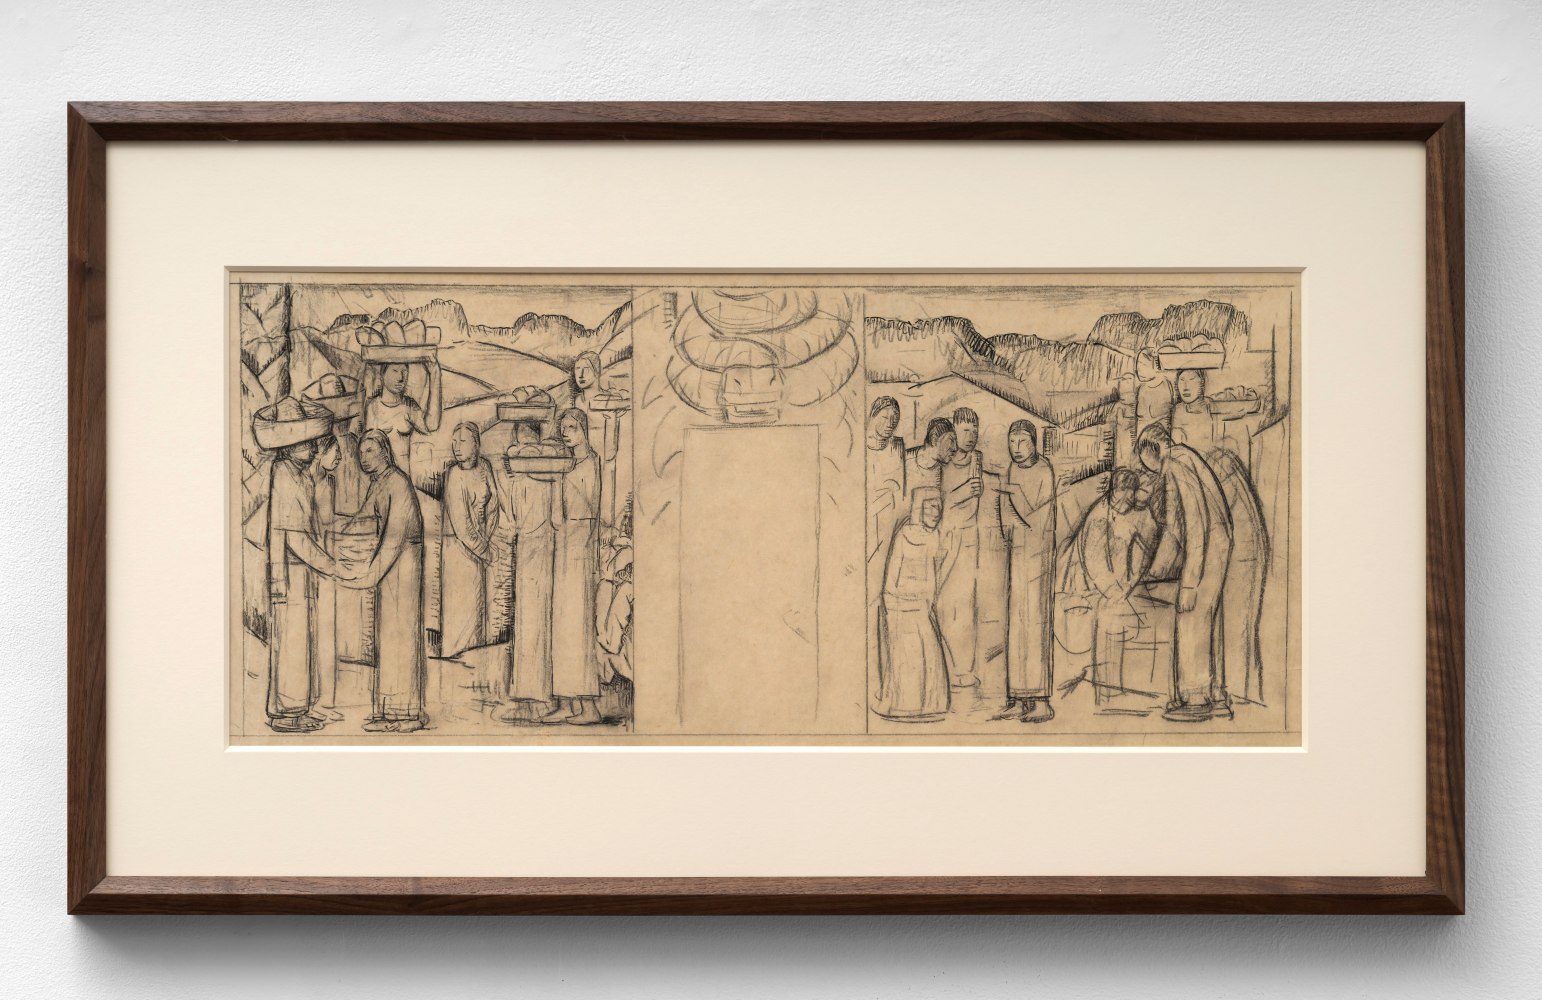 Alfredo Ramos Martínez (1871-1946) Study for La Guelaguetza (Jo Swerling Residence), c. 1933     pen and pencil on paper 12 3/4 x 23 1/4 inches;  32.4 x 59 centimeters LSFA# 14694